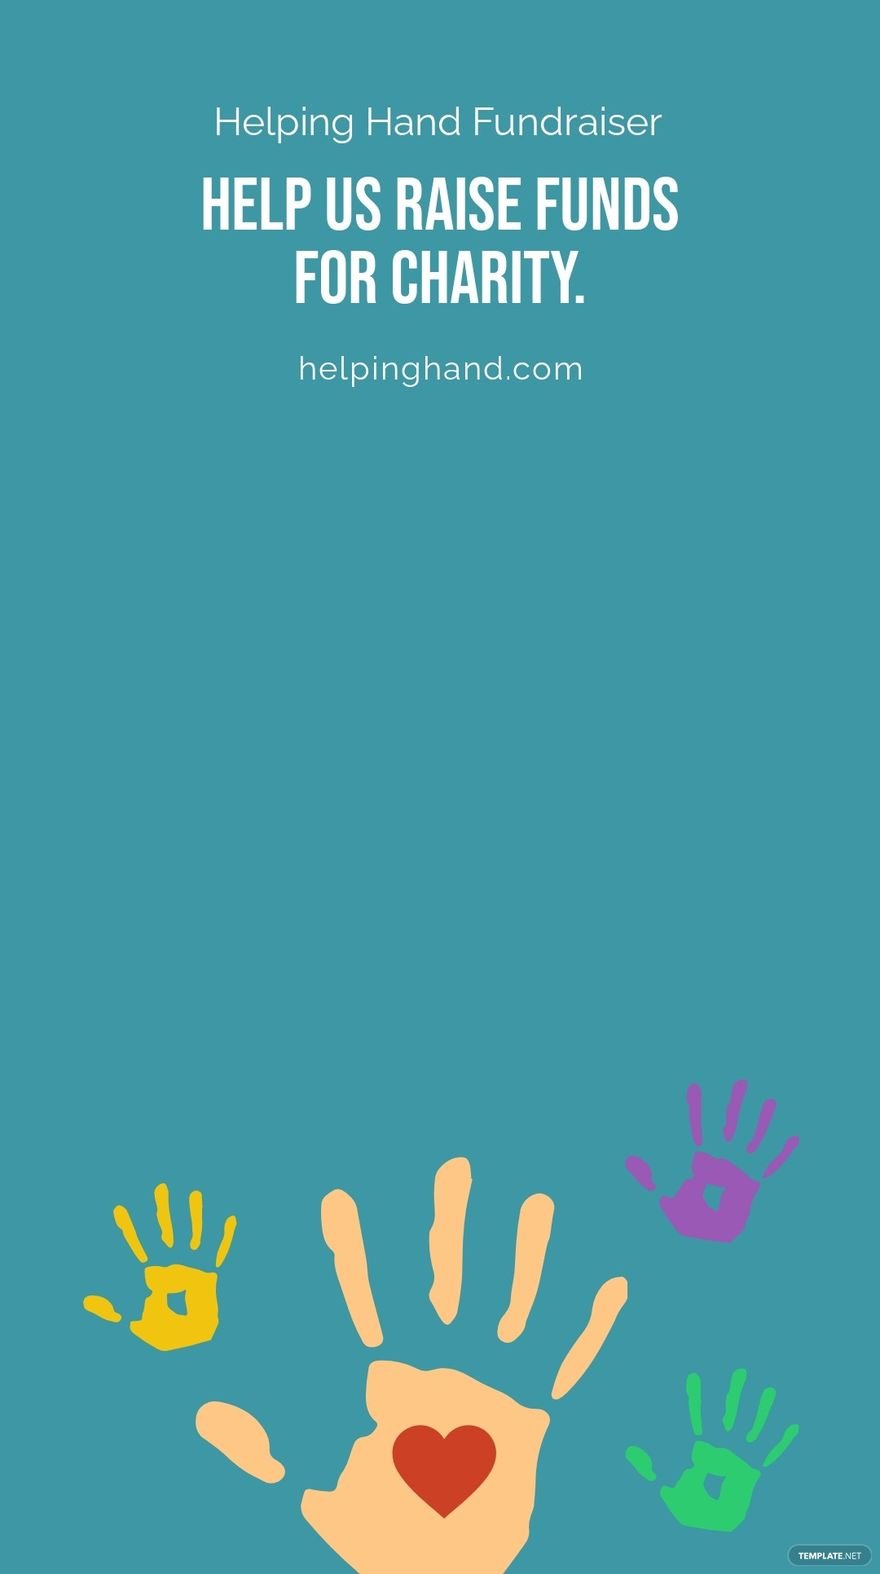 Fundraiser Campaign Snapchat Geofilter Template.jpe